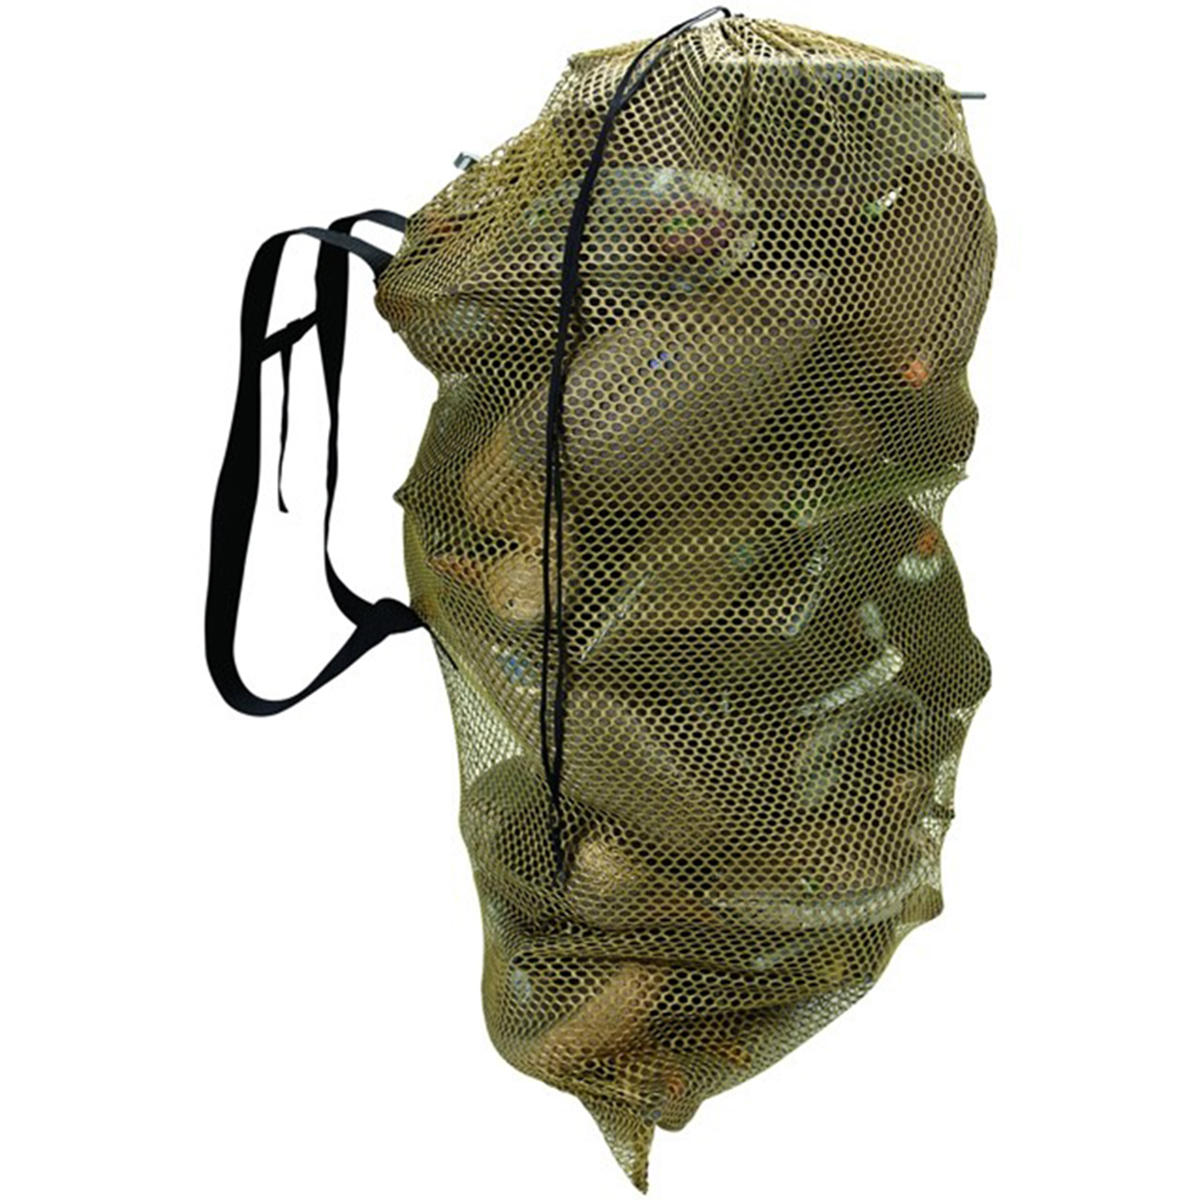 Duck Decoy Storage Net Bag With Shoulder Straps Dove Mesh Backpack Pigeon Carry Large For Hunting